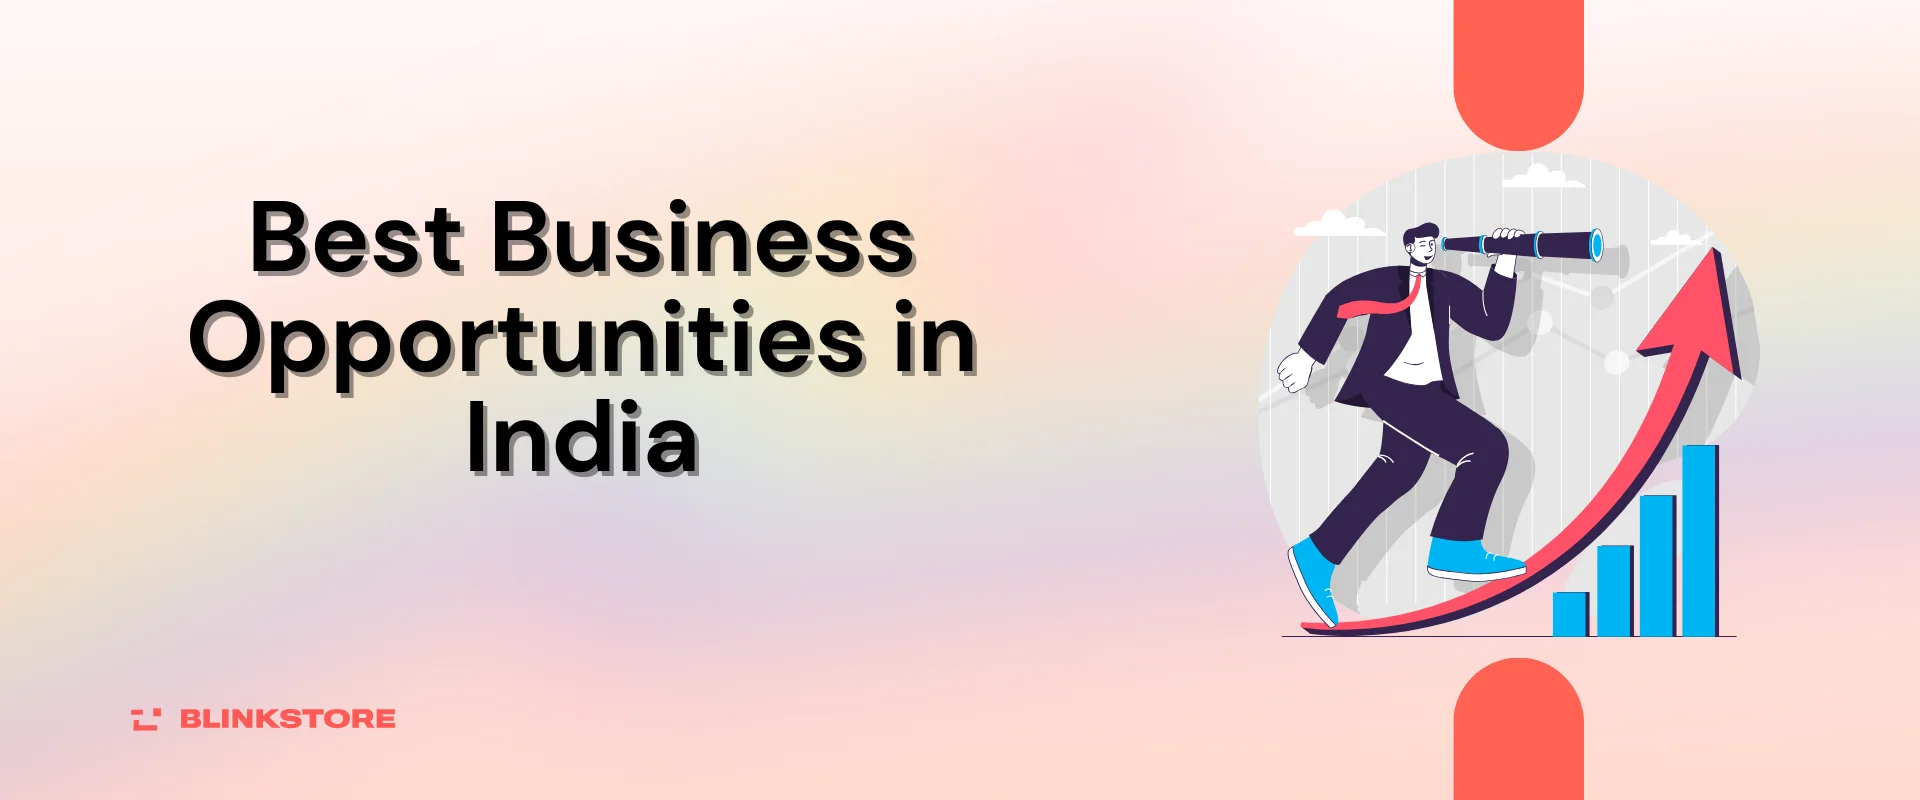 Best Business Opportunities in India